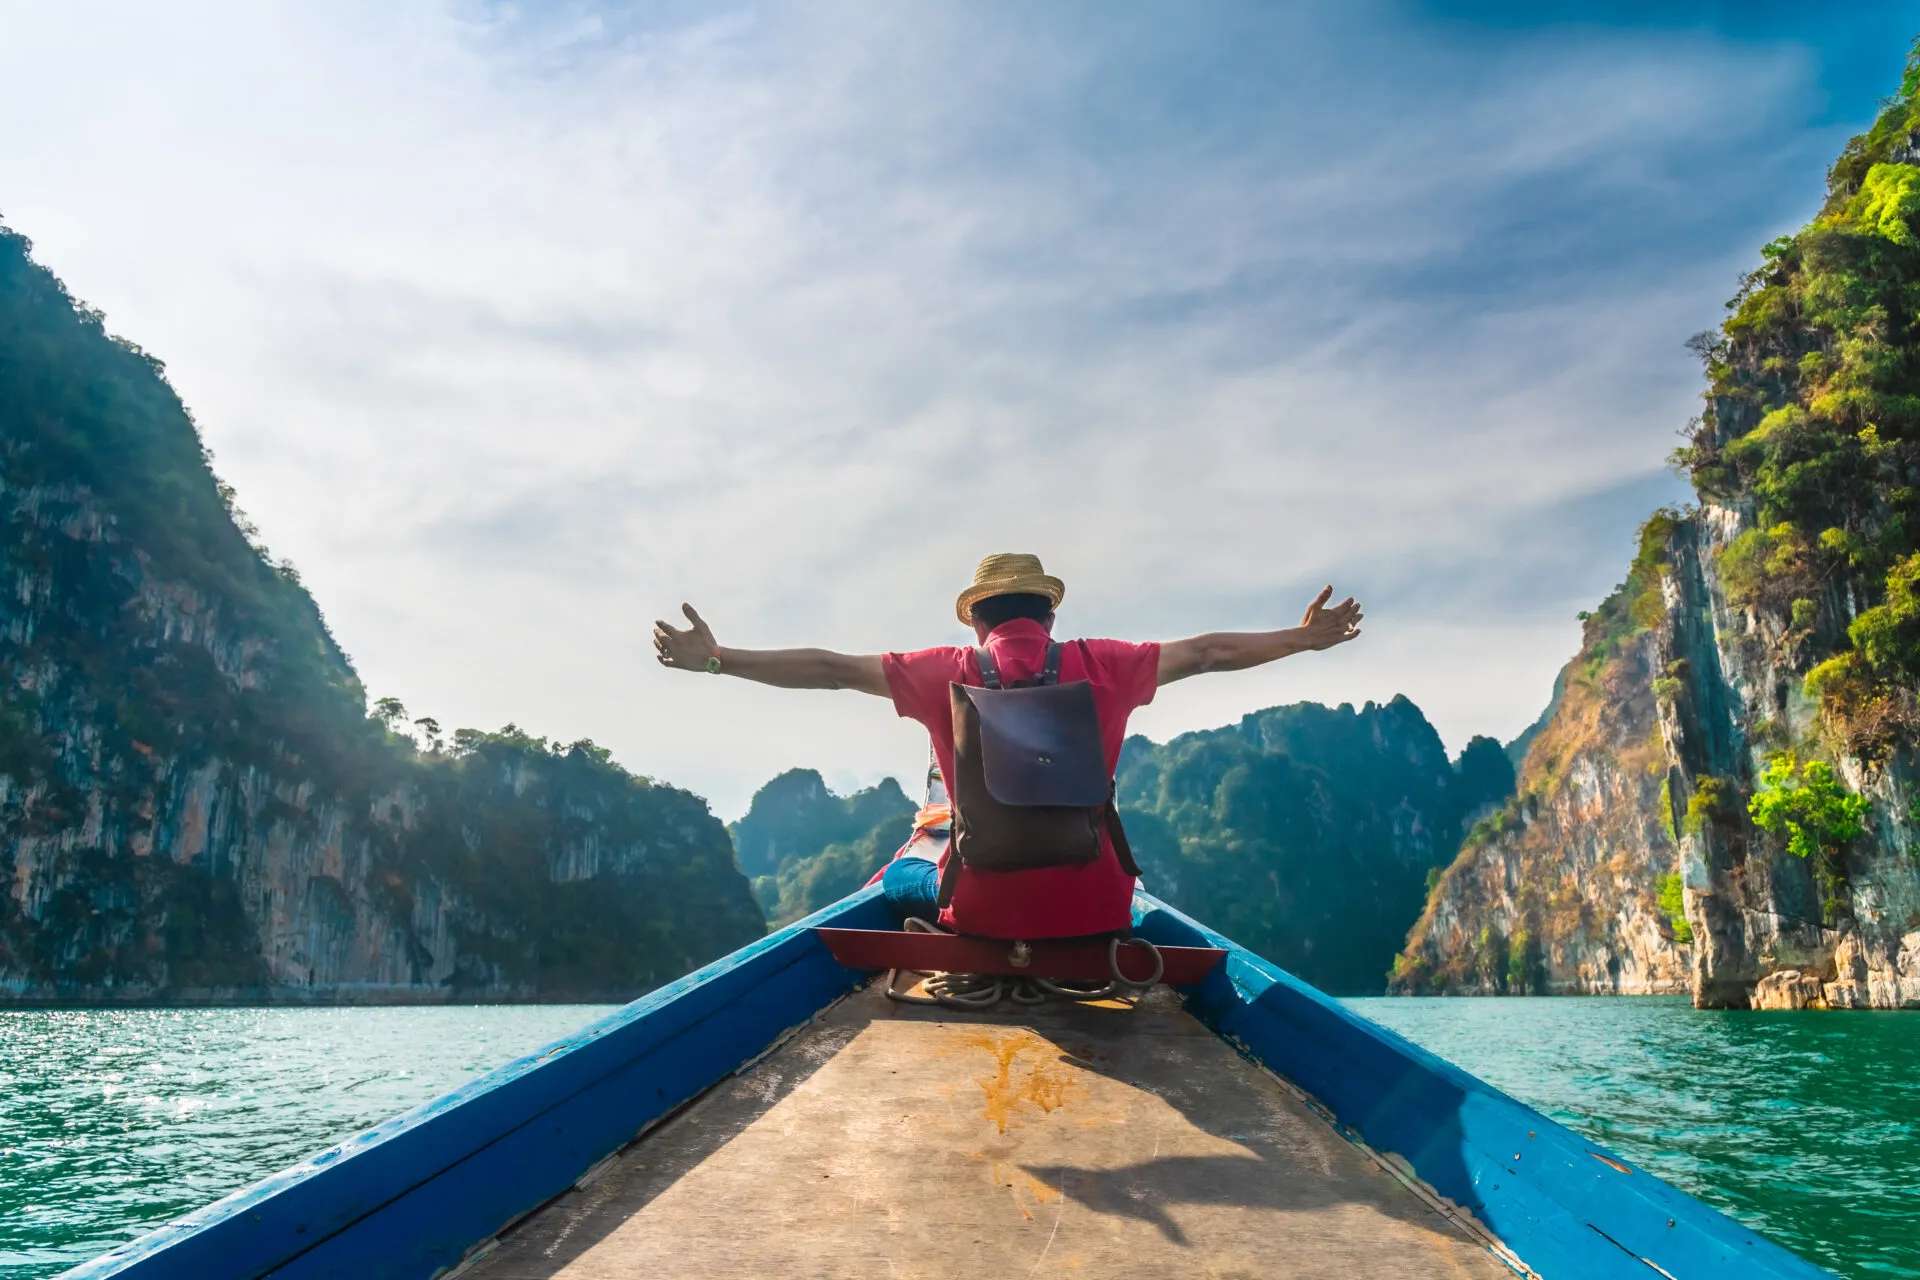 Man traveler on boat joy fun with nature rock mountain island scenic landscape Khao Sok National park, Famous travel adventure place Thailand, Tourism beautiful destinations Asia holiday vacation trip